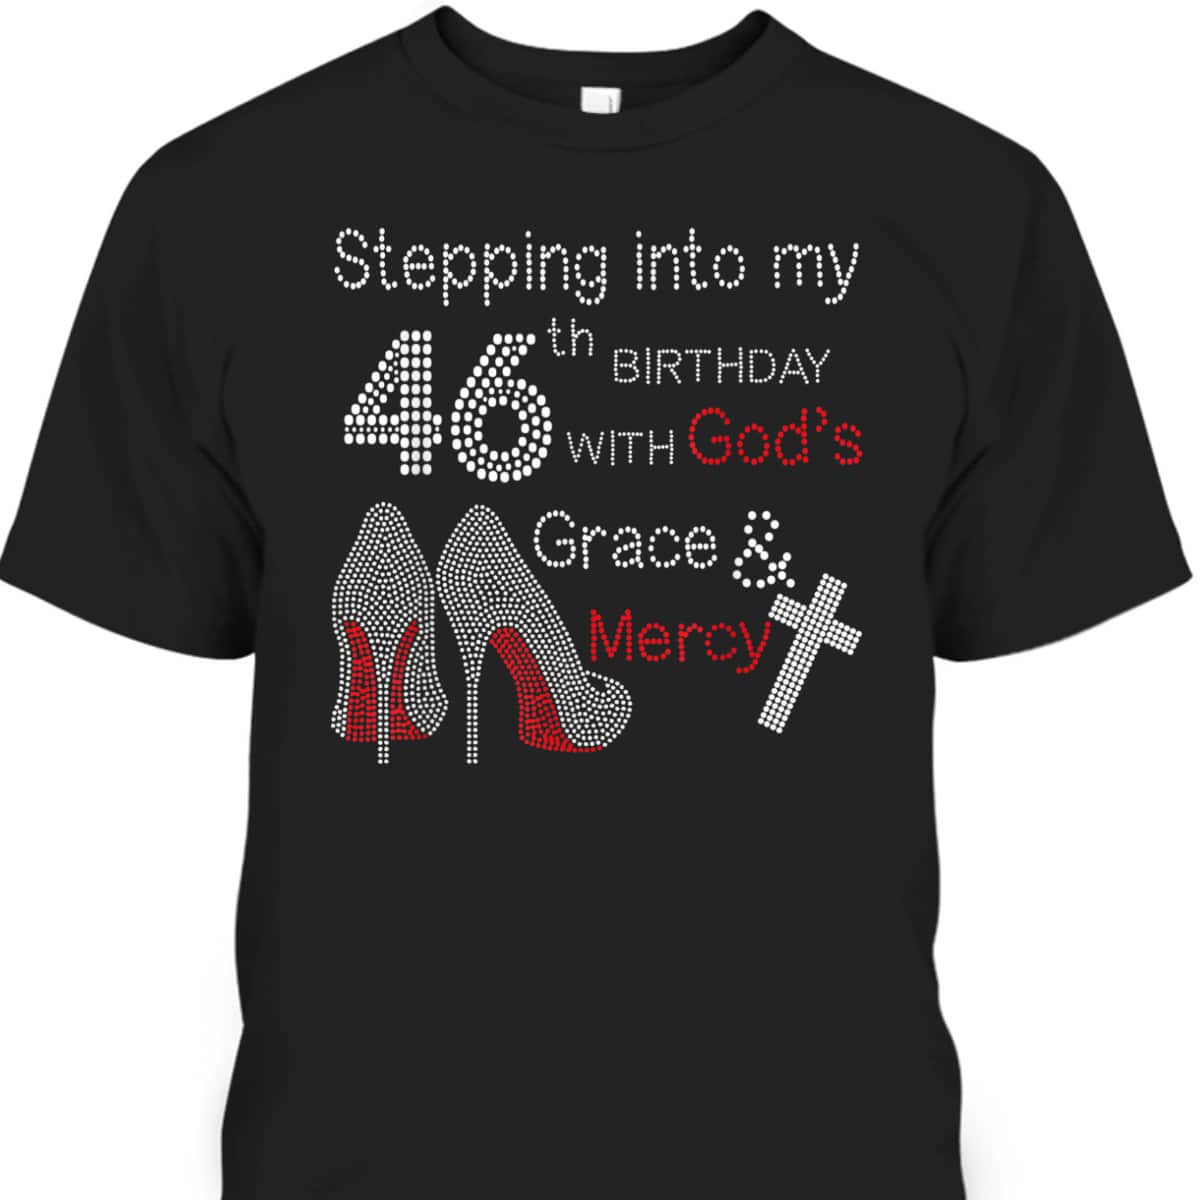 Christian Stepping Into My 46th Birthday With God's Grace And Mercy T-Shirt